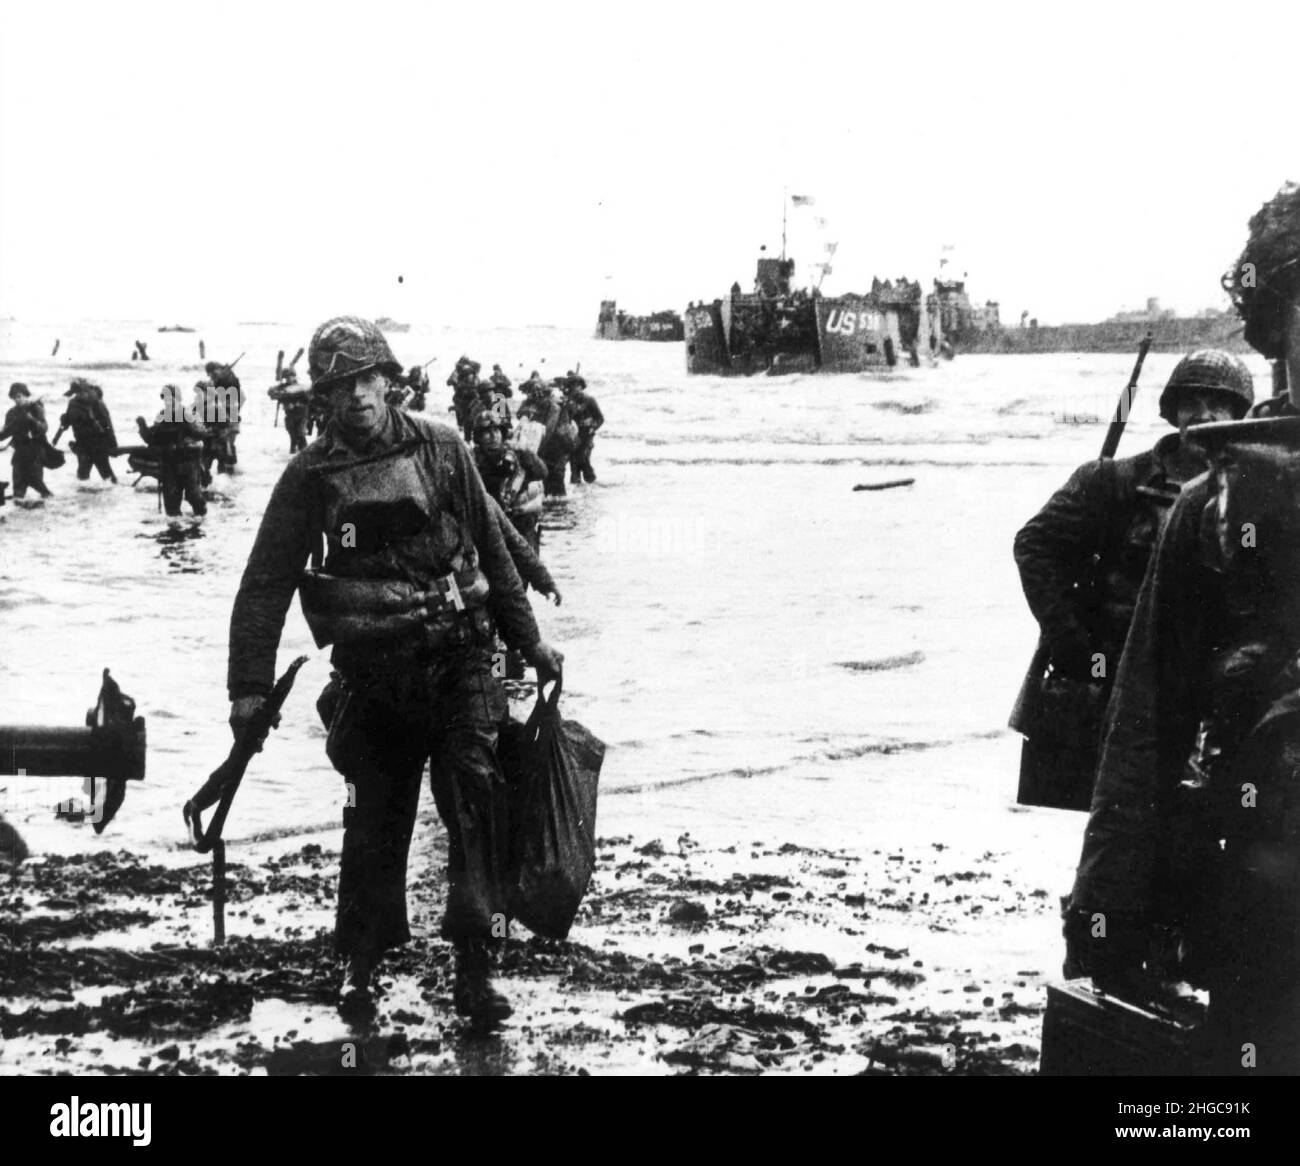 American troops move onto Utah Beach  during the D-Day landings. Landing craft can be seen in the background. Stock Photo